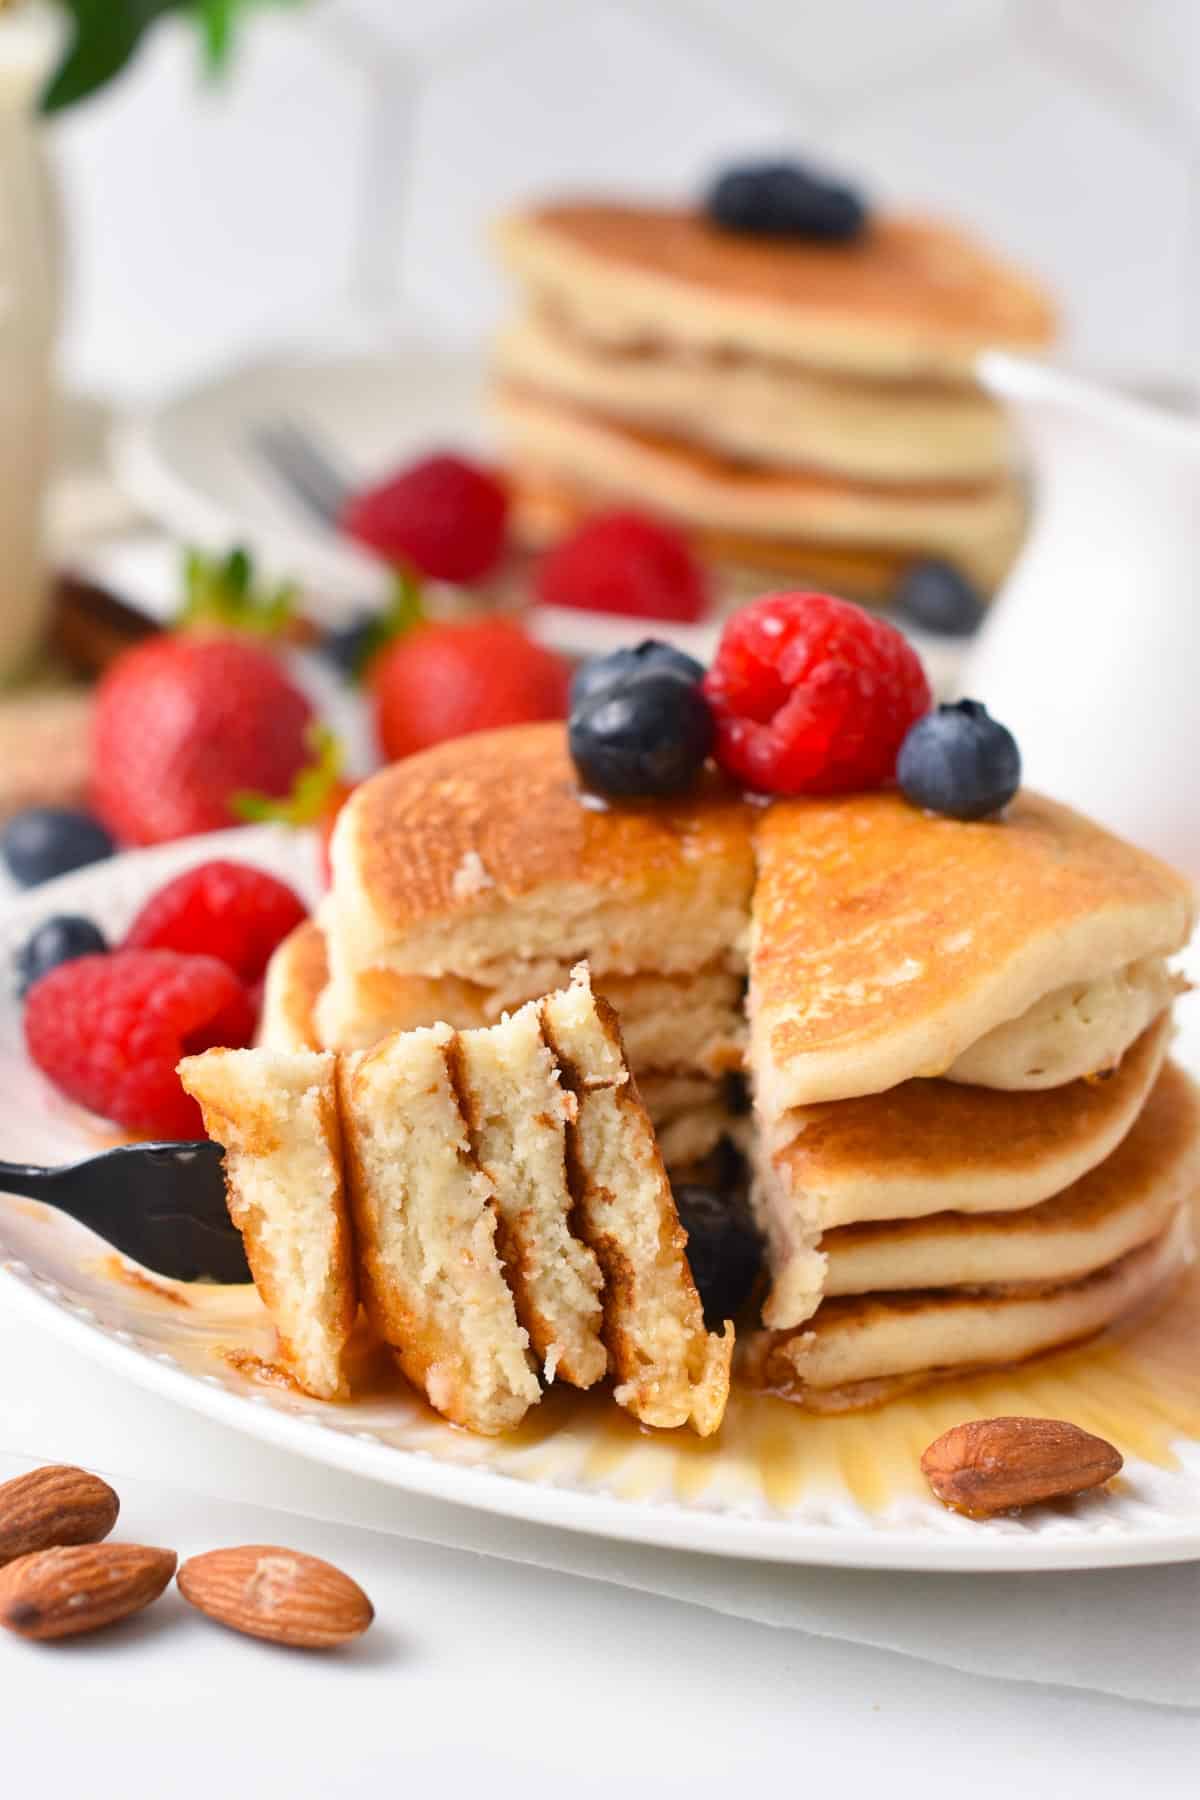 A stack of vegan almond flour pancakes with blueberries and raspberry on top and a fork showing the fluffy texture inside the pancakes.